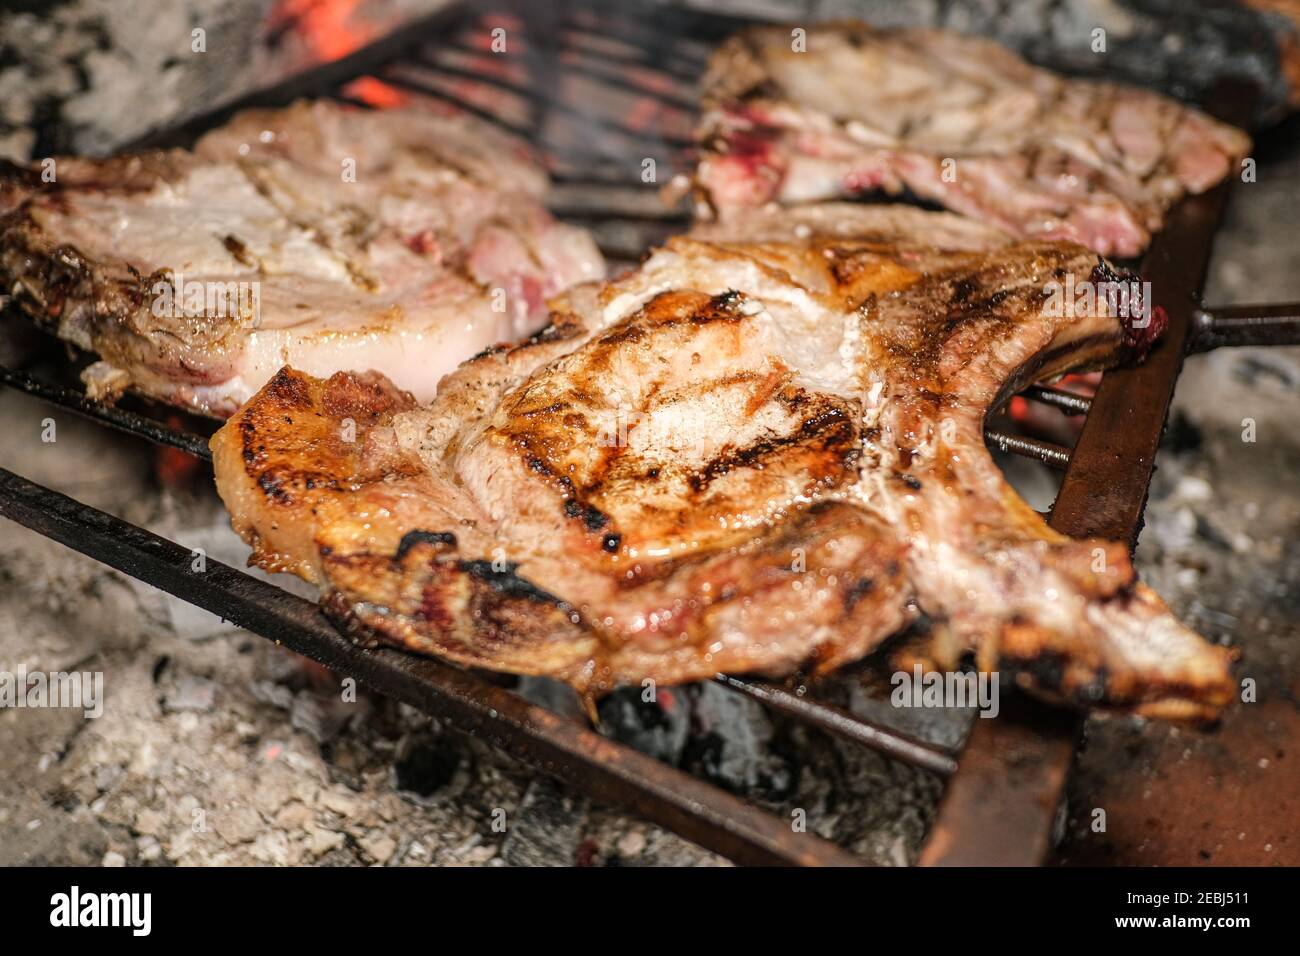 Grilling pork chop steak,grilled meat barbecue, tasty fat food lifestyle Stock Photo